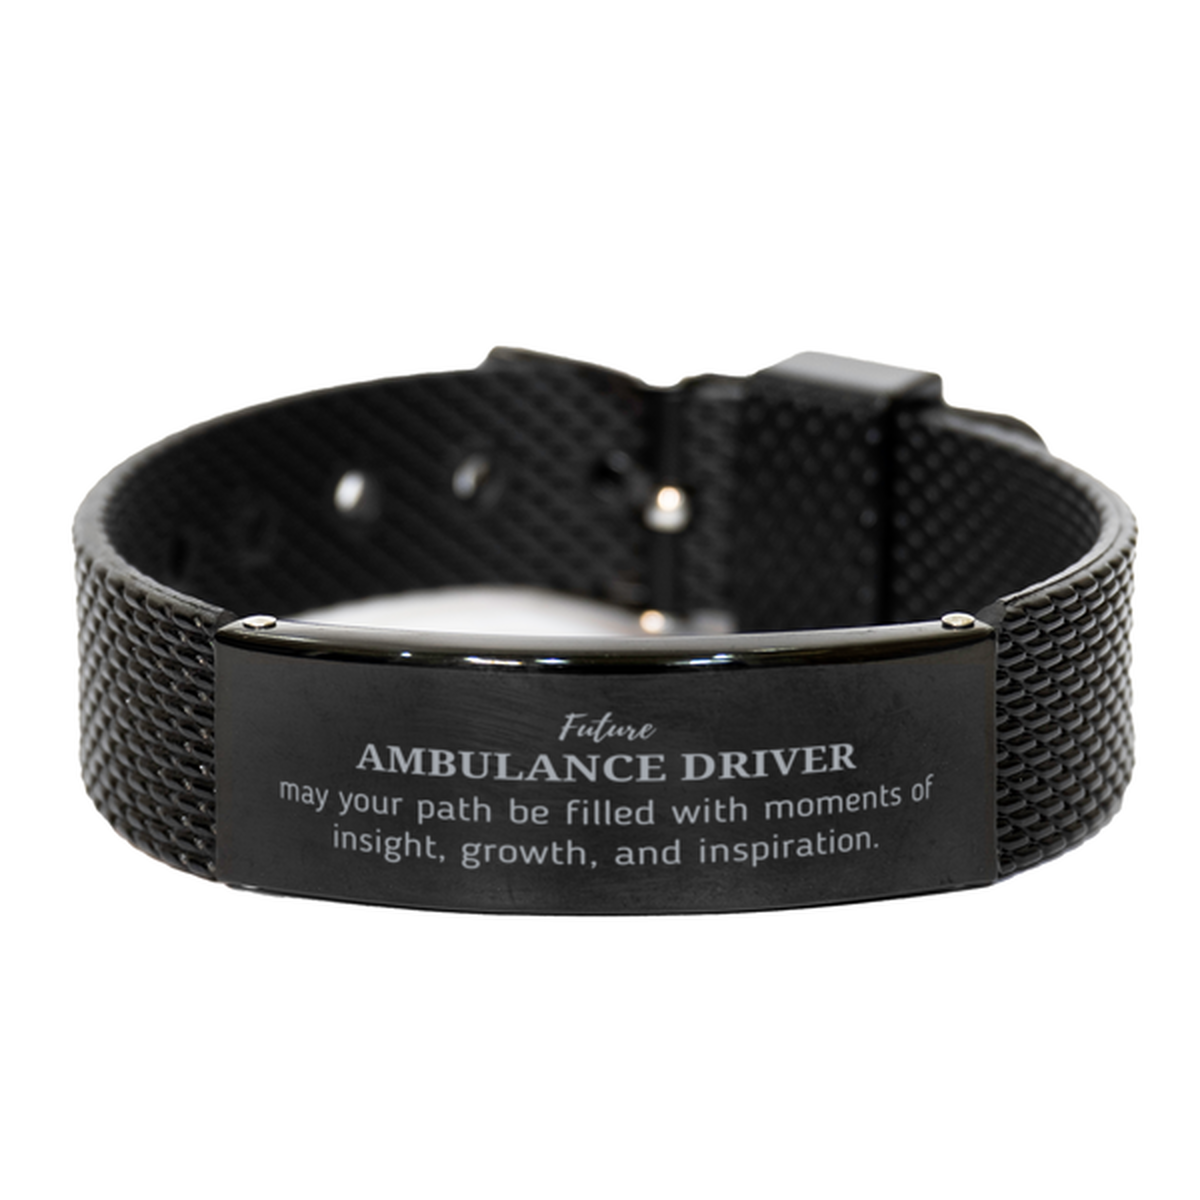 Future Ambulance Driver Gifts, May your path be filled with moments of insight, Graduation Gifts for New Ambulance Driver, Christmas Unique Black Shark Mesh Bracelet For Men, Women, Friends